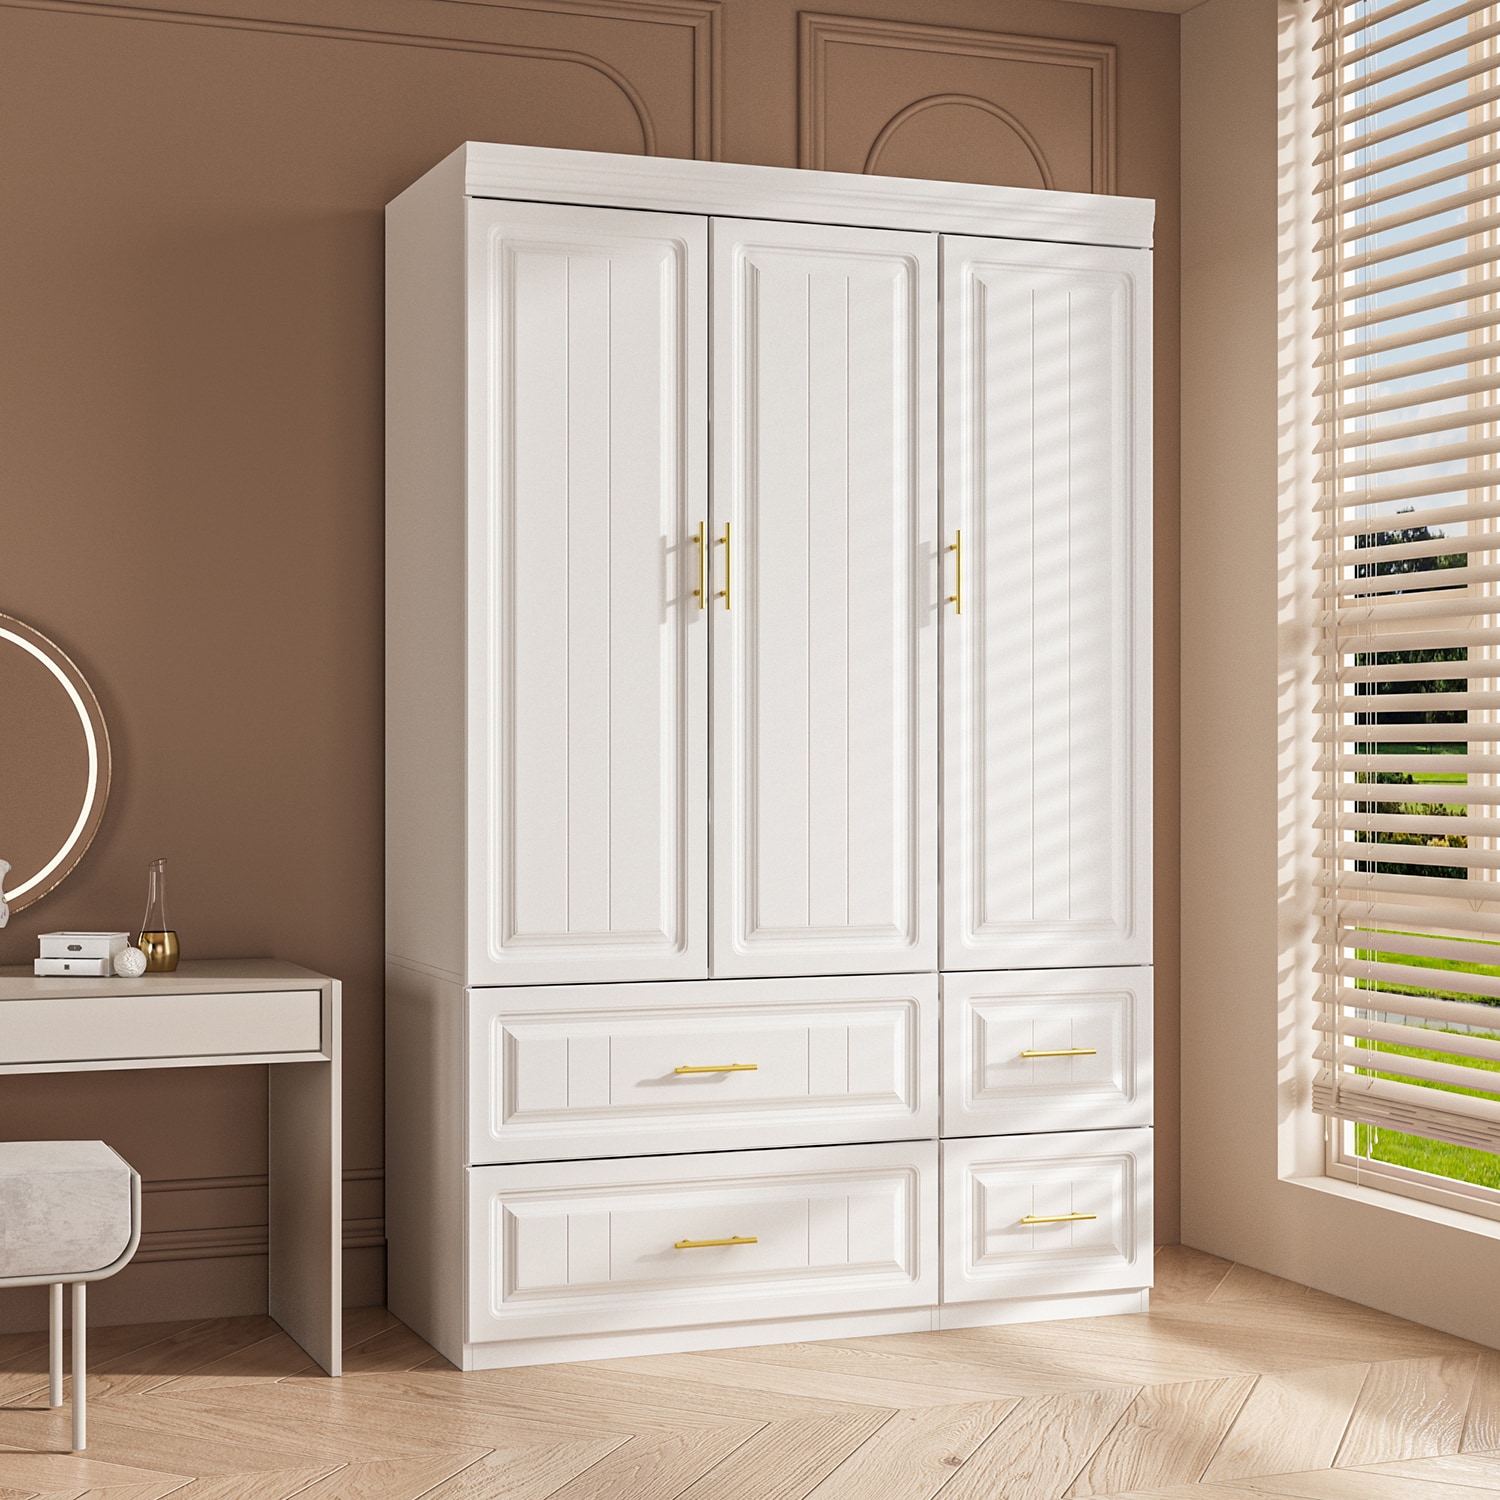 Drawers Metal Wardrobe Spaces with Slide Closet and Finish, the Rails 3-Door White at 4 Armoires Multiple Contemporary - FUFU&GAGA department Storage in